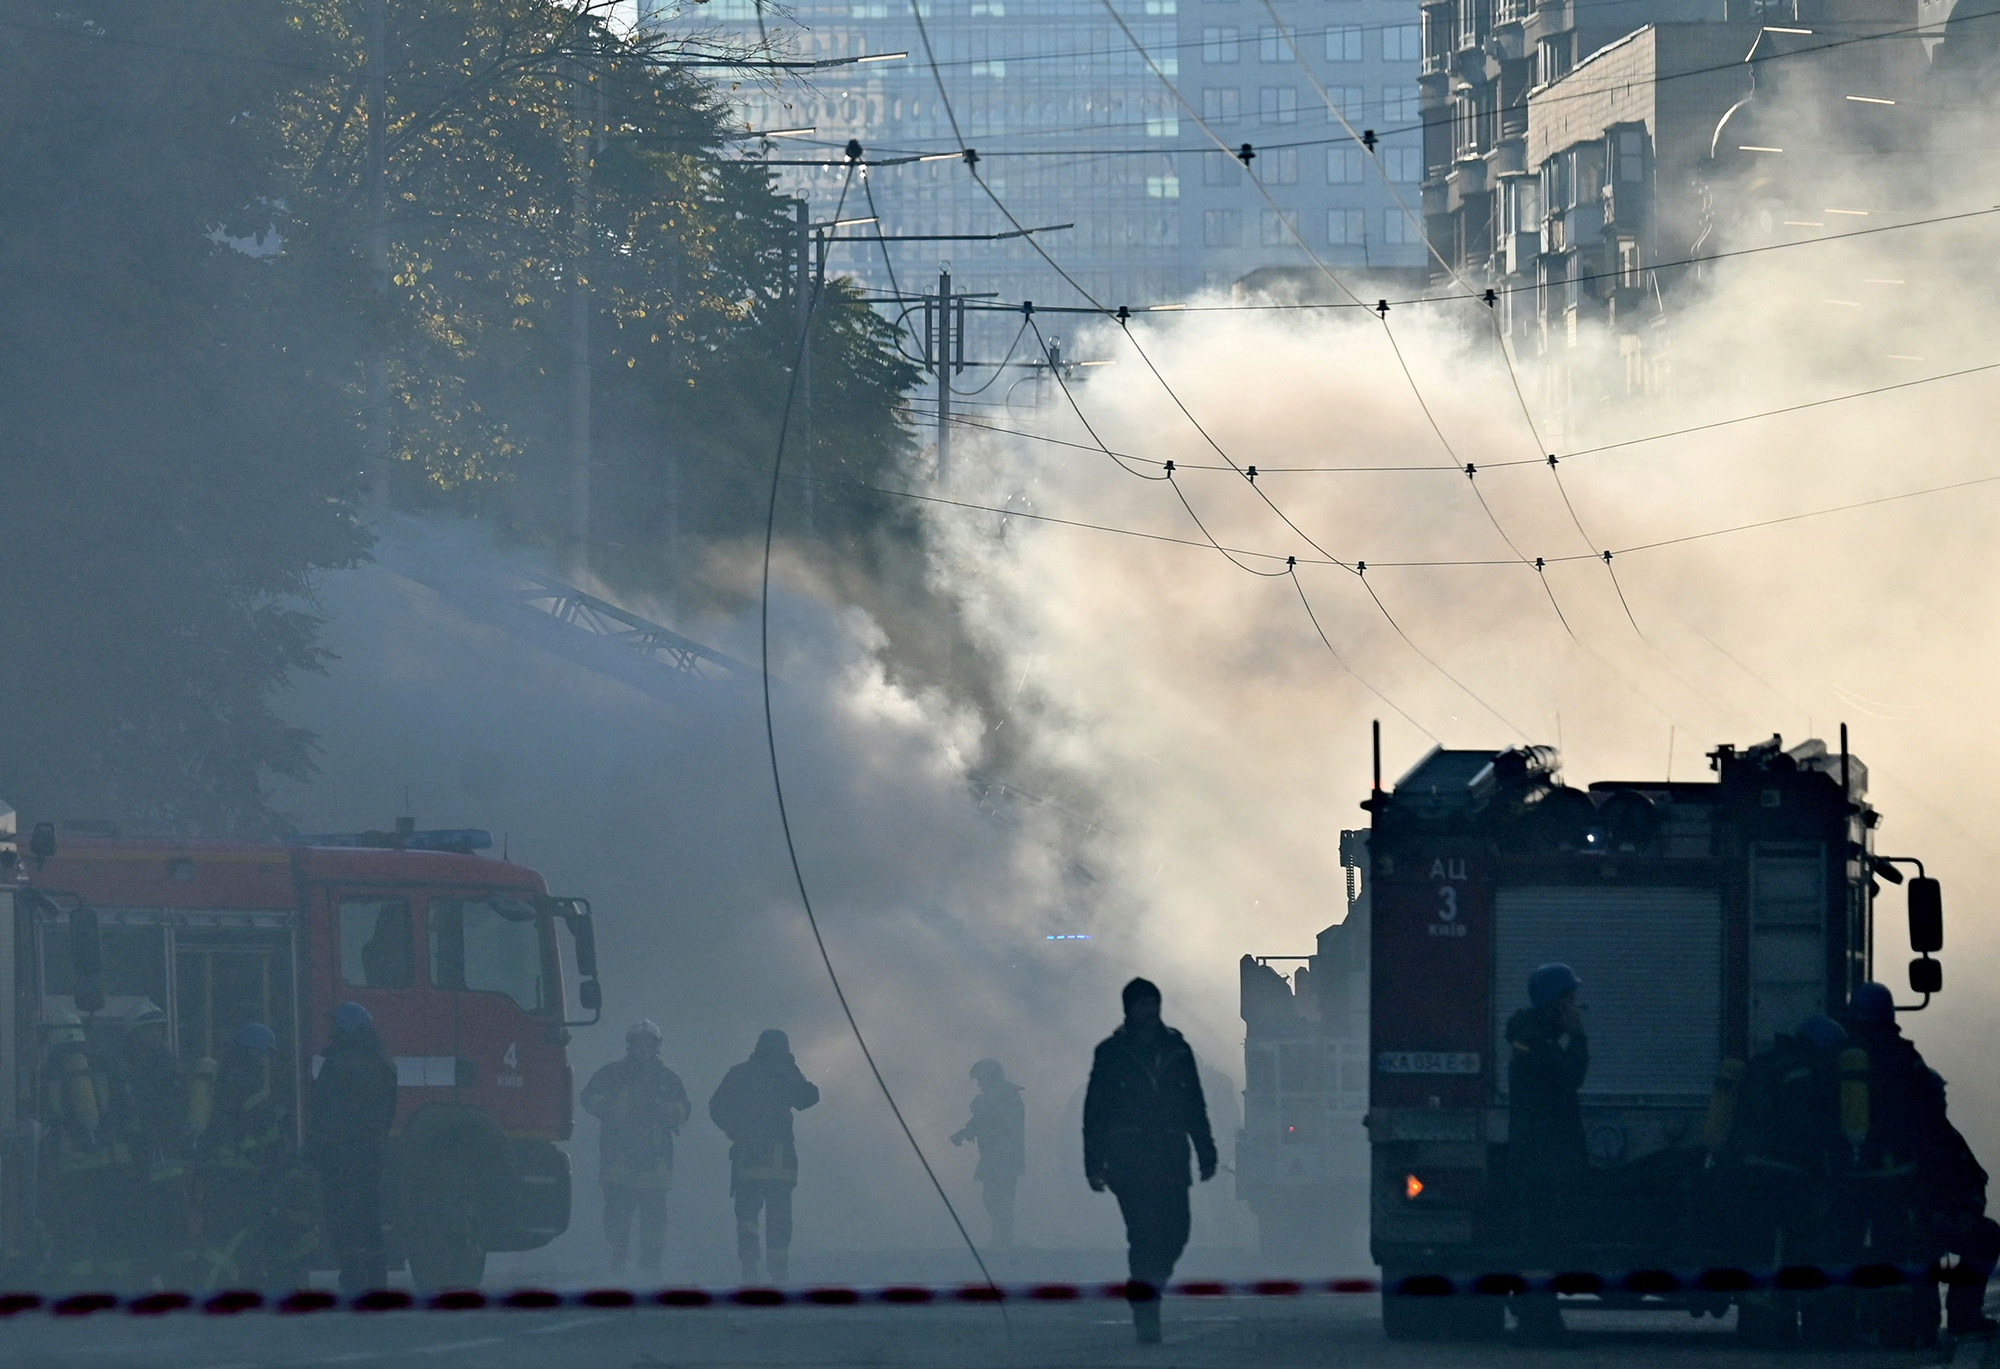 Smoke rises over the street after a drone attack in Kyiv, Ukraine, on October 17.